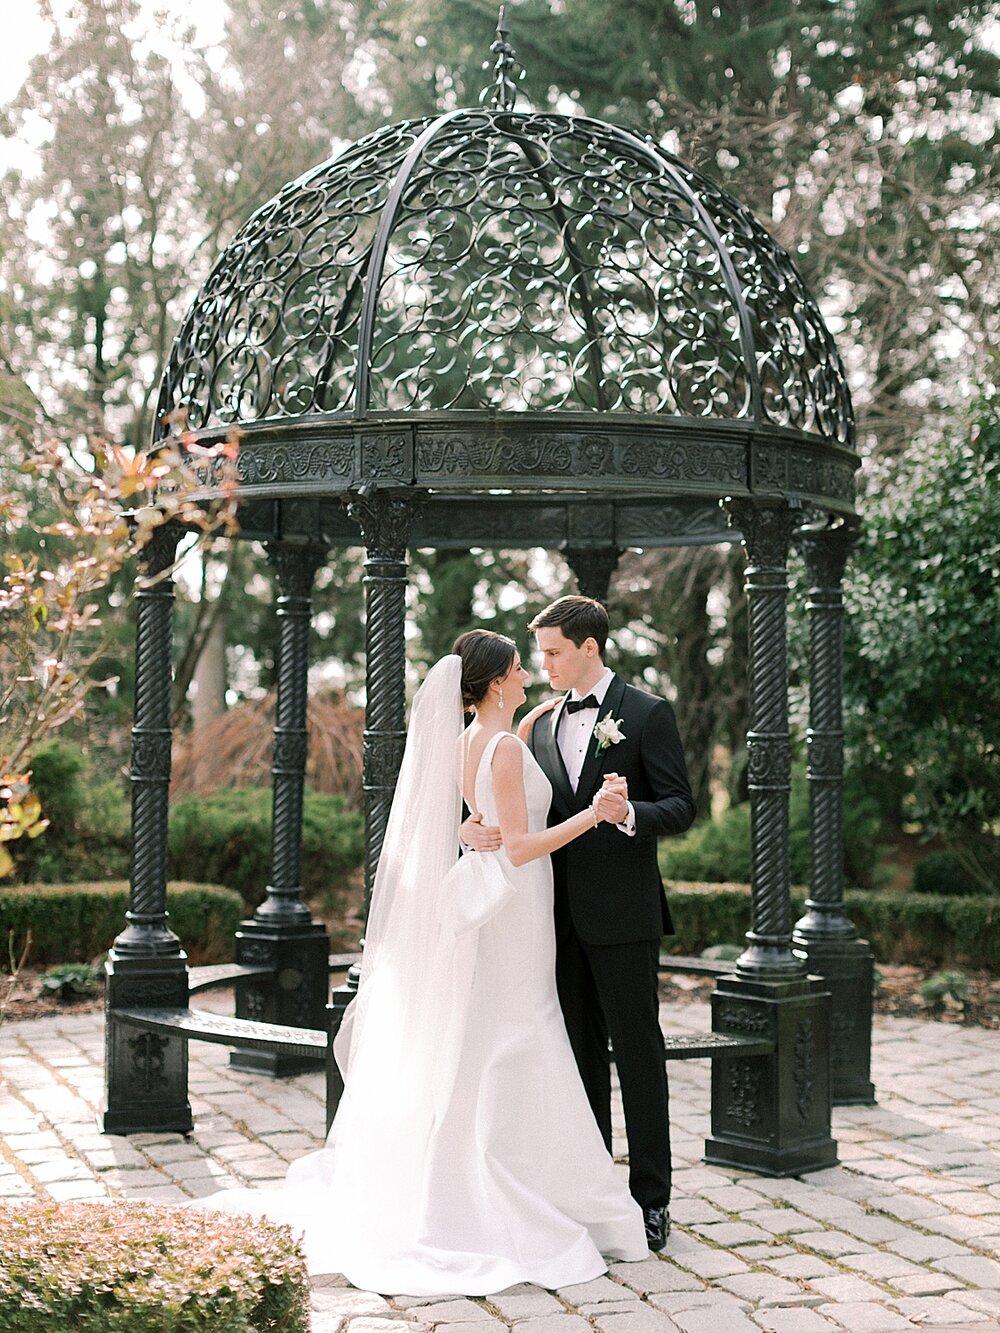 newlyweds kiss by gazebo at sophisticated New Jersey venue | Tri-State area wedding venues photographed by Asher Gardner Photography